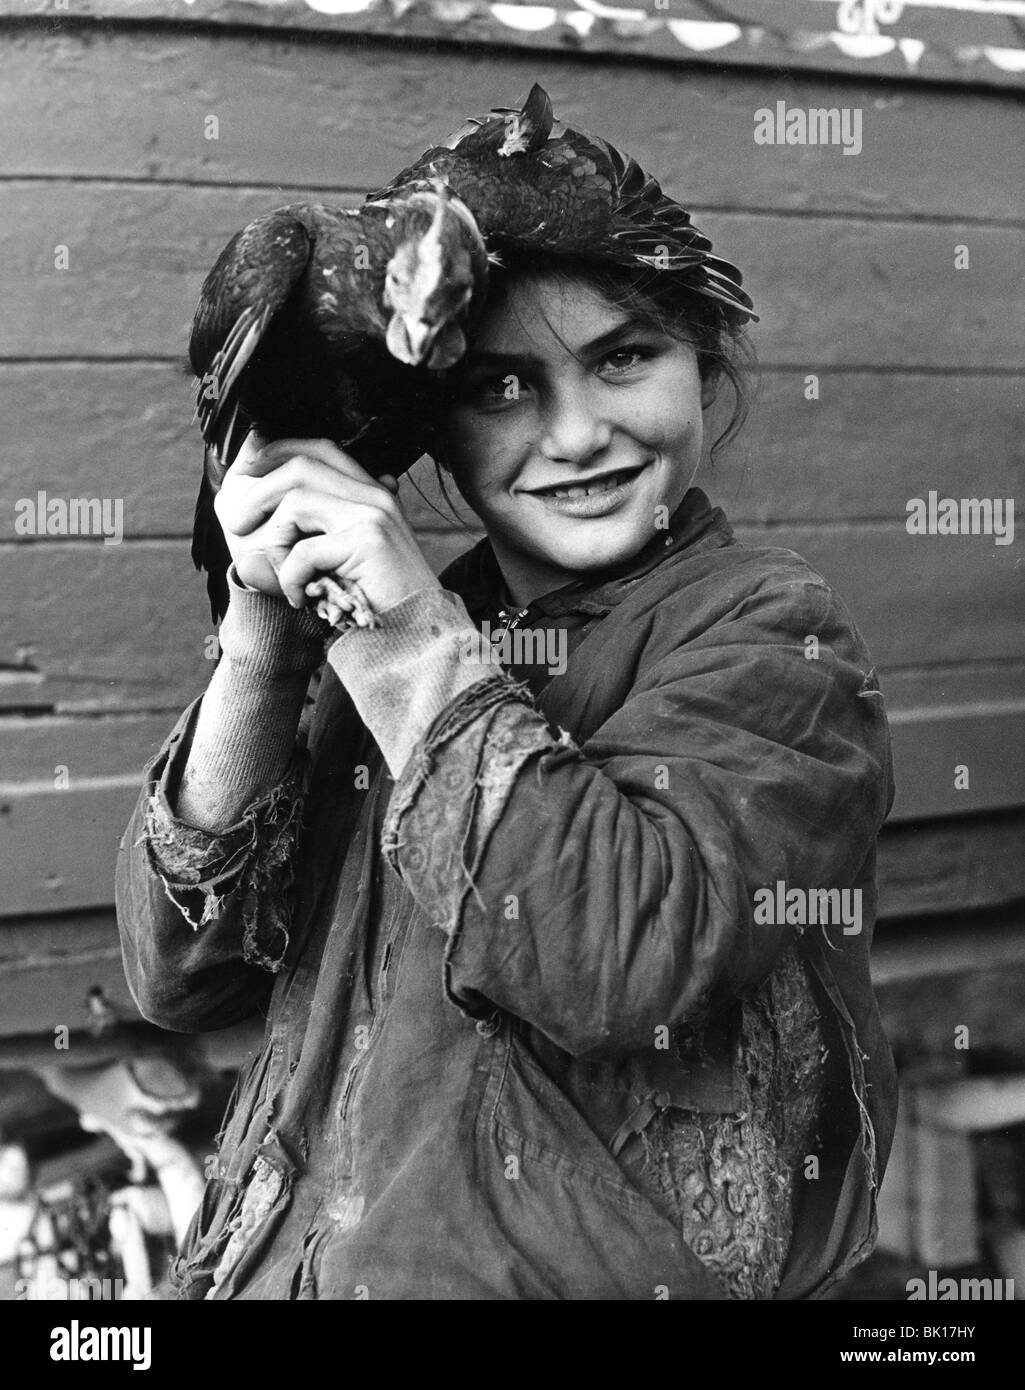 Gipsy girl holding a chicken, 1960s. Stock Photo